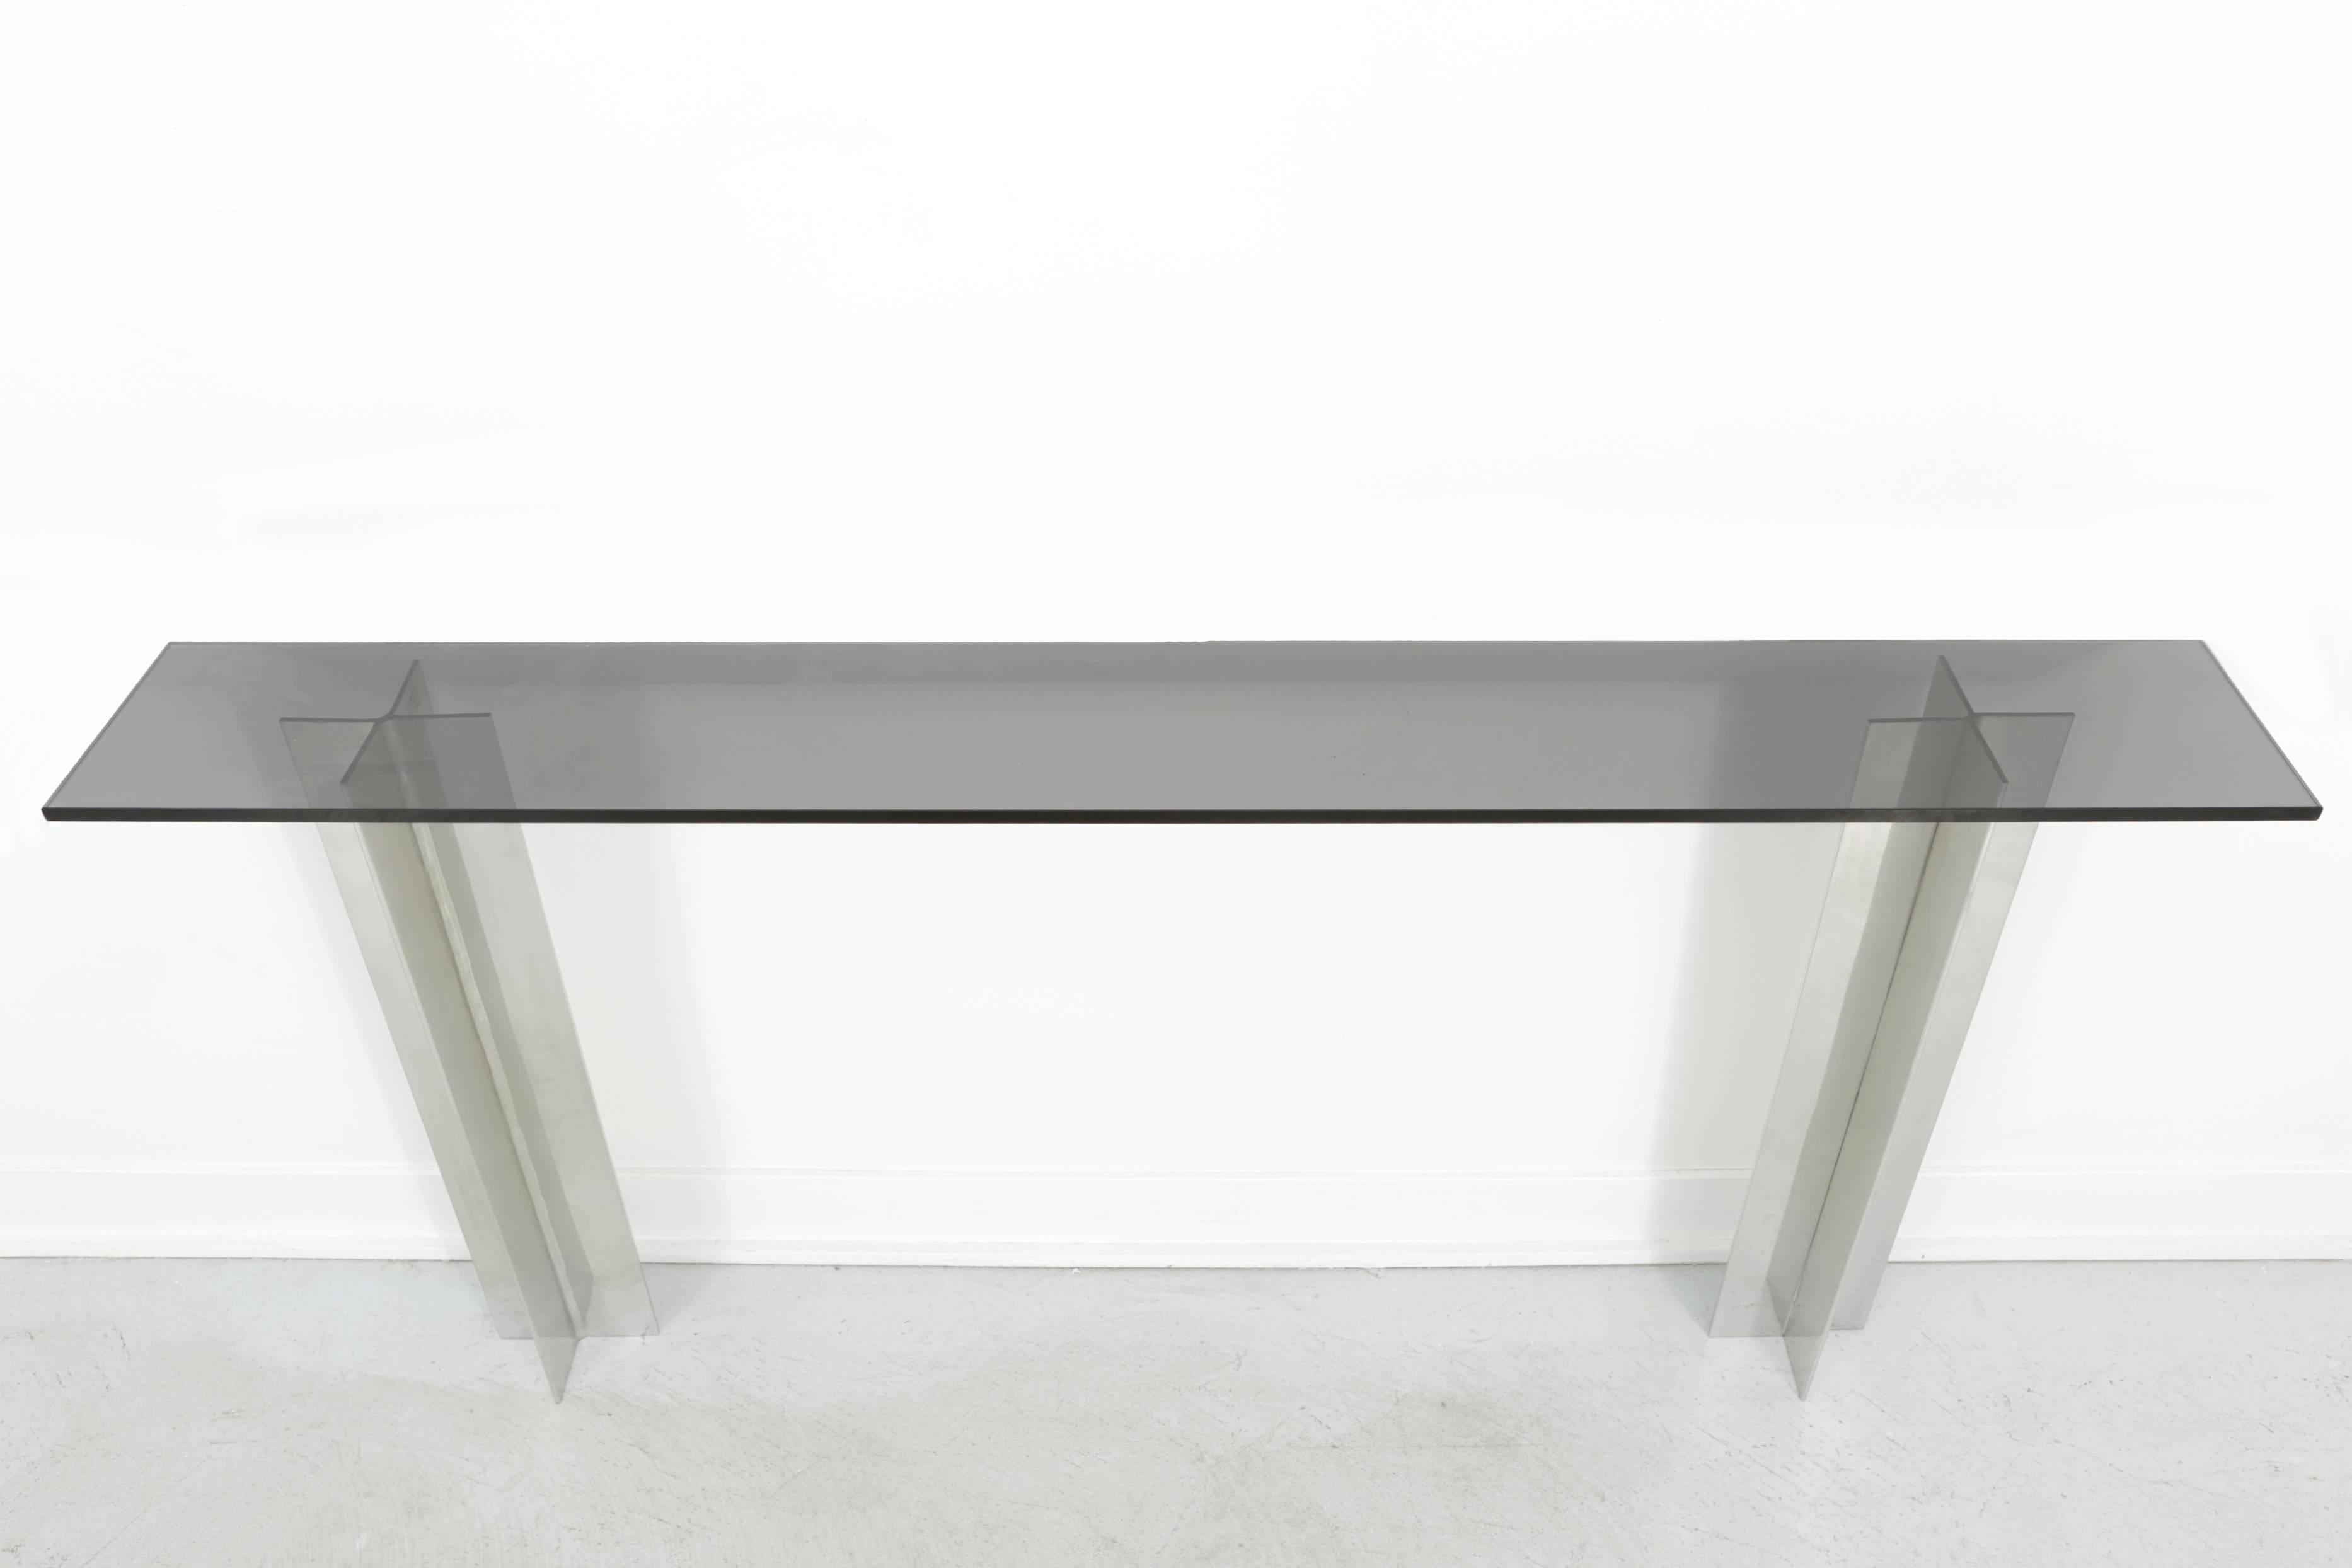 Smoked glass and aluminium console table attributed to Pace Manufacturing. The smoked glass rests upon two aluminium pillars. The console is meant to rest upon a wall.